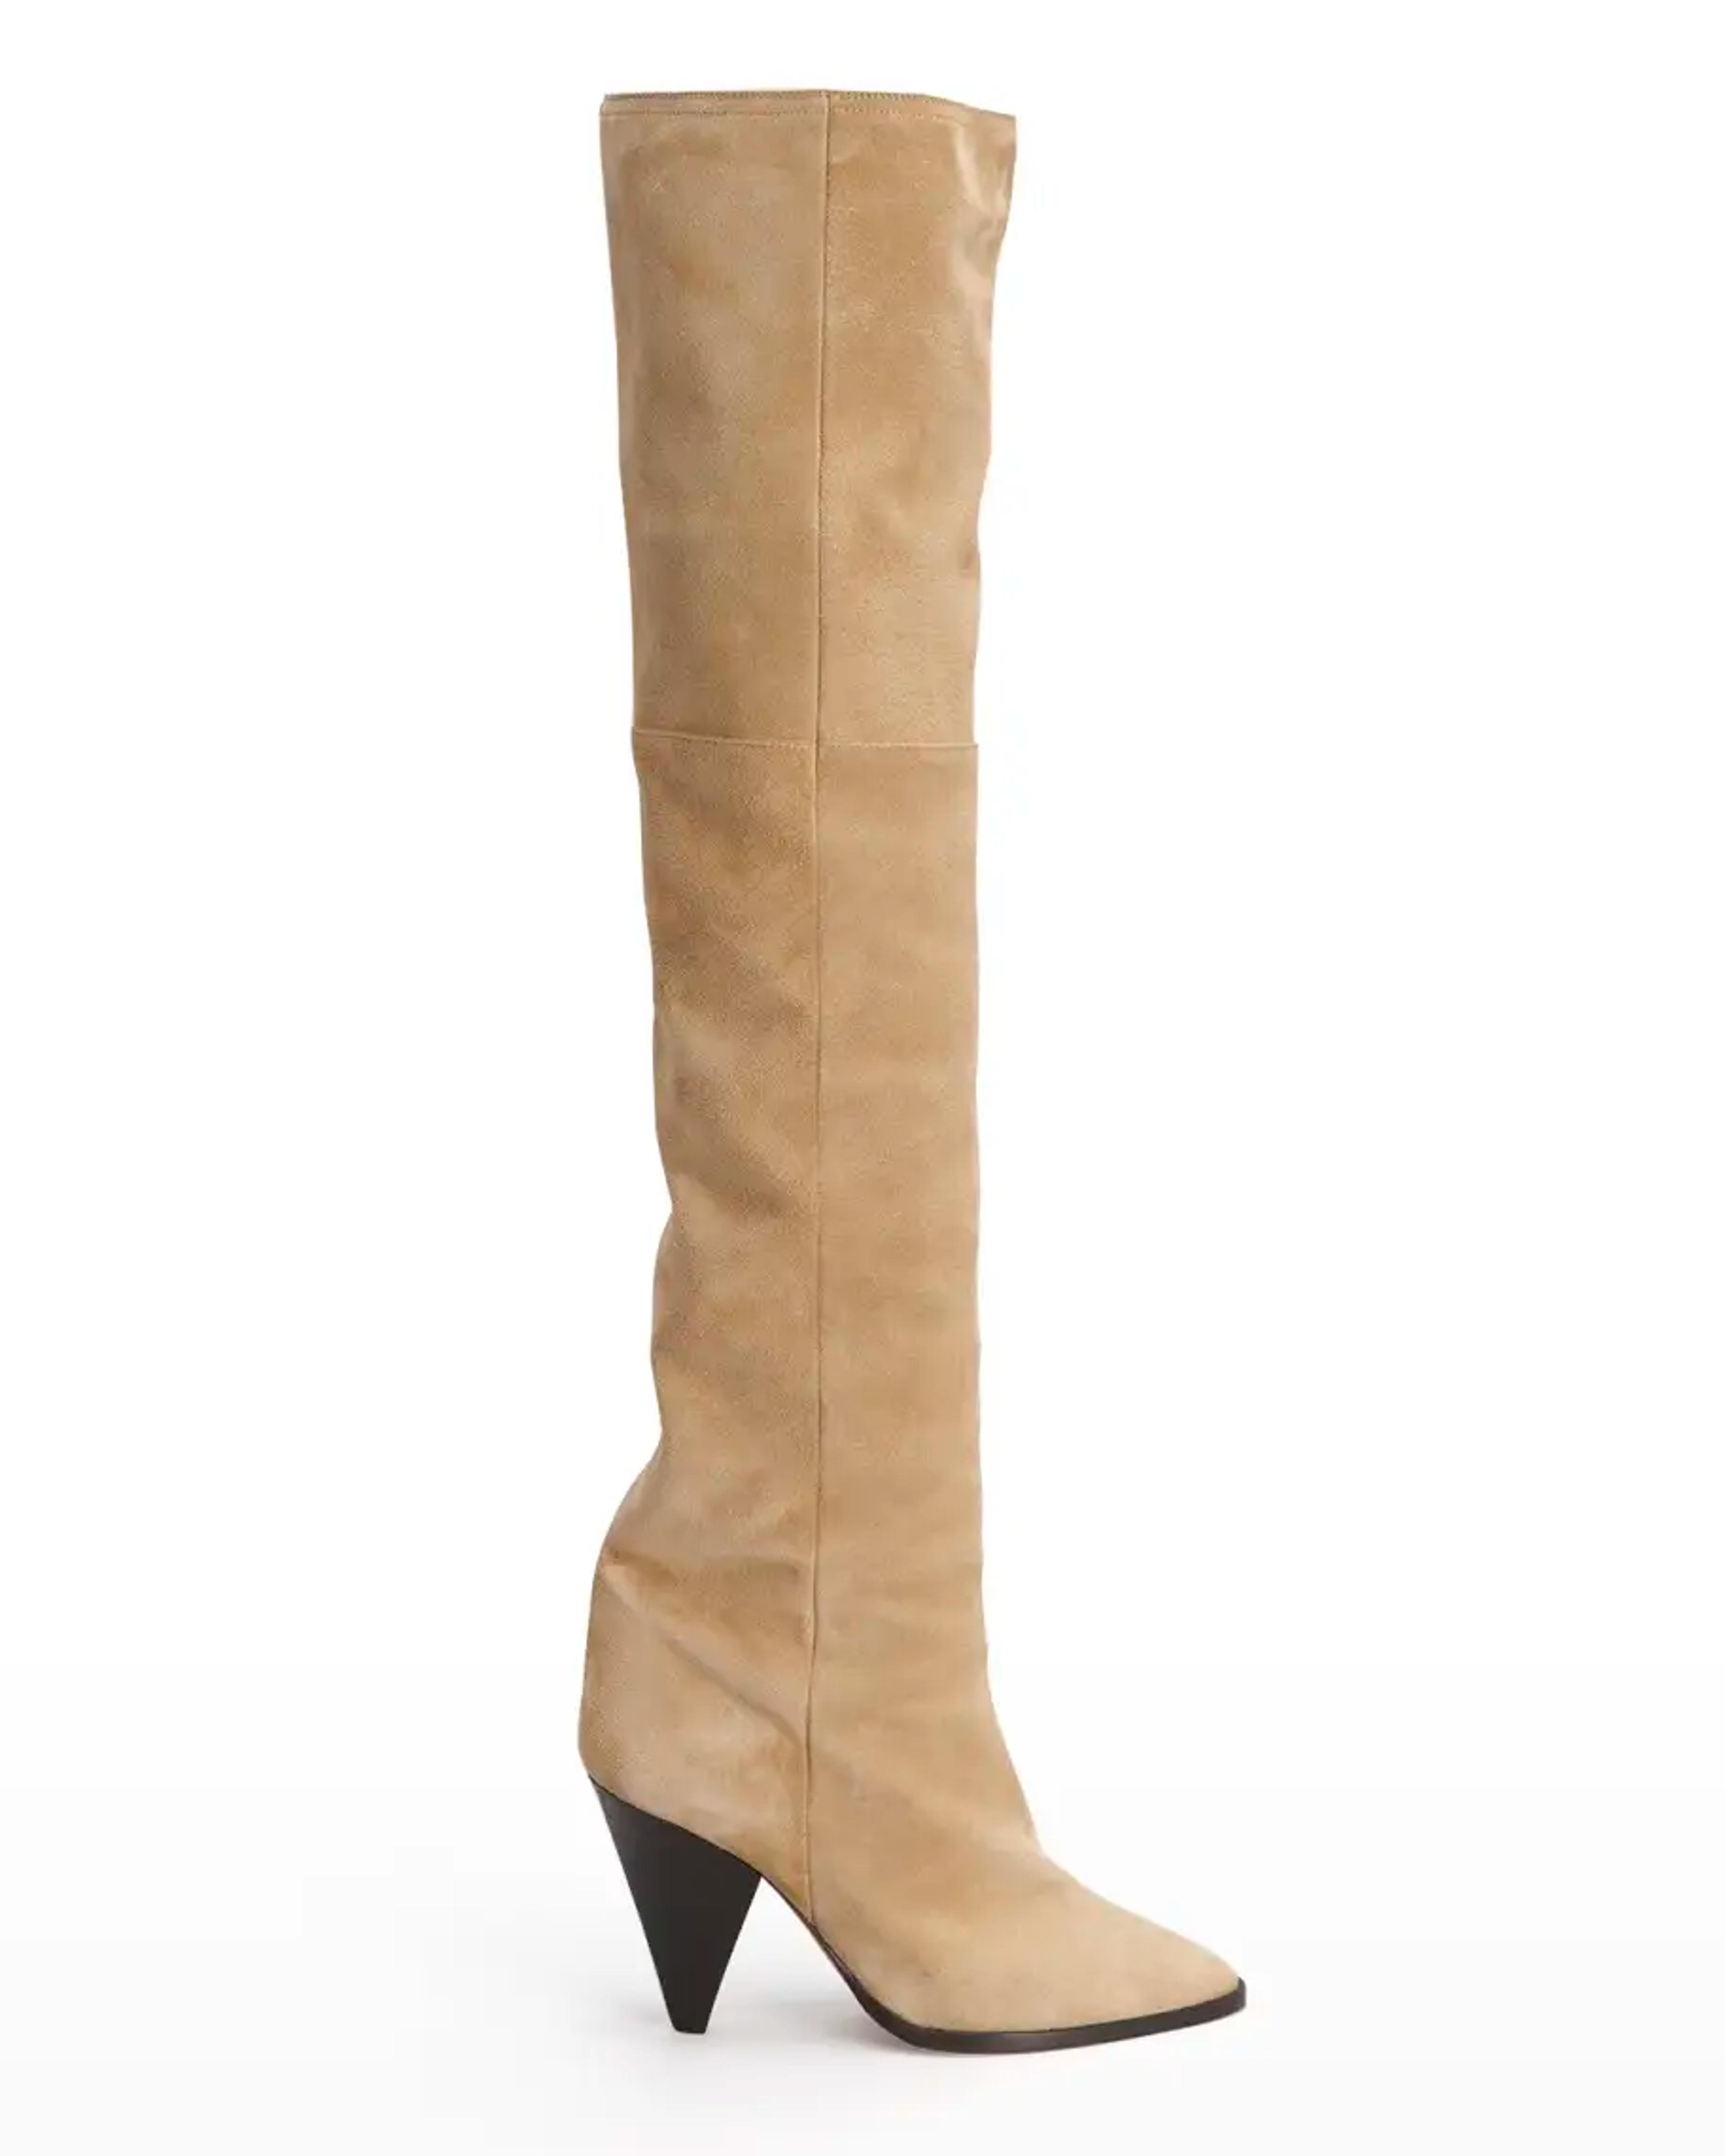 Isabel Marant Suede Slouchy Knee Boots | Neiman Marcus